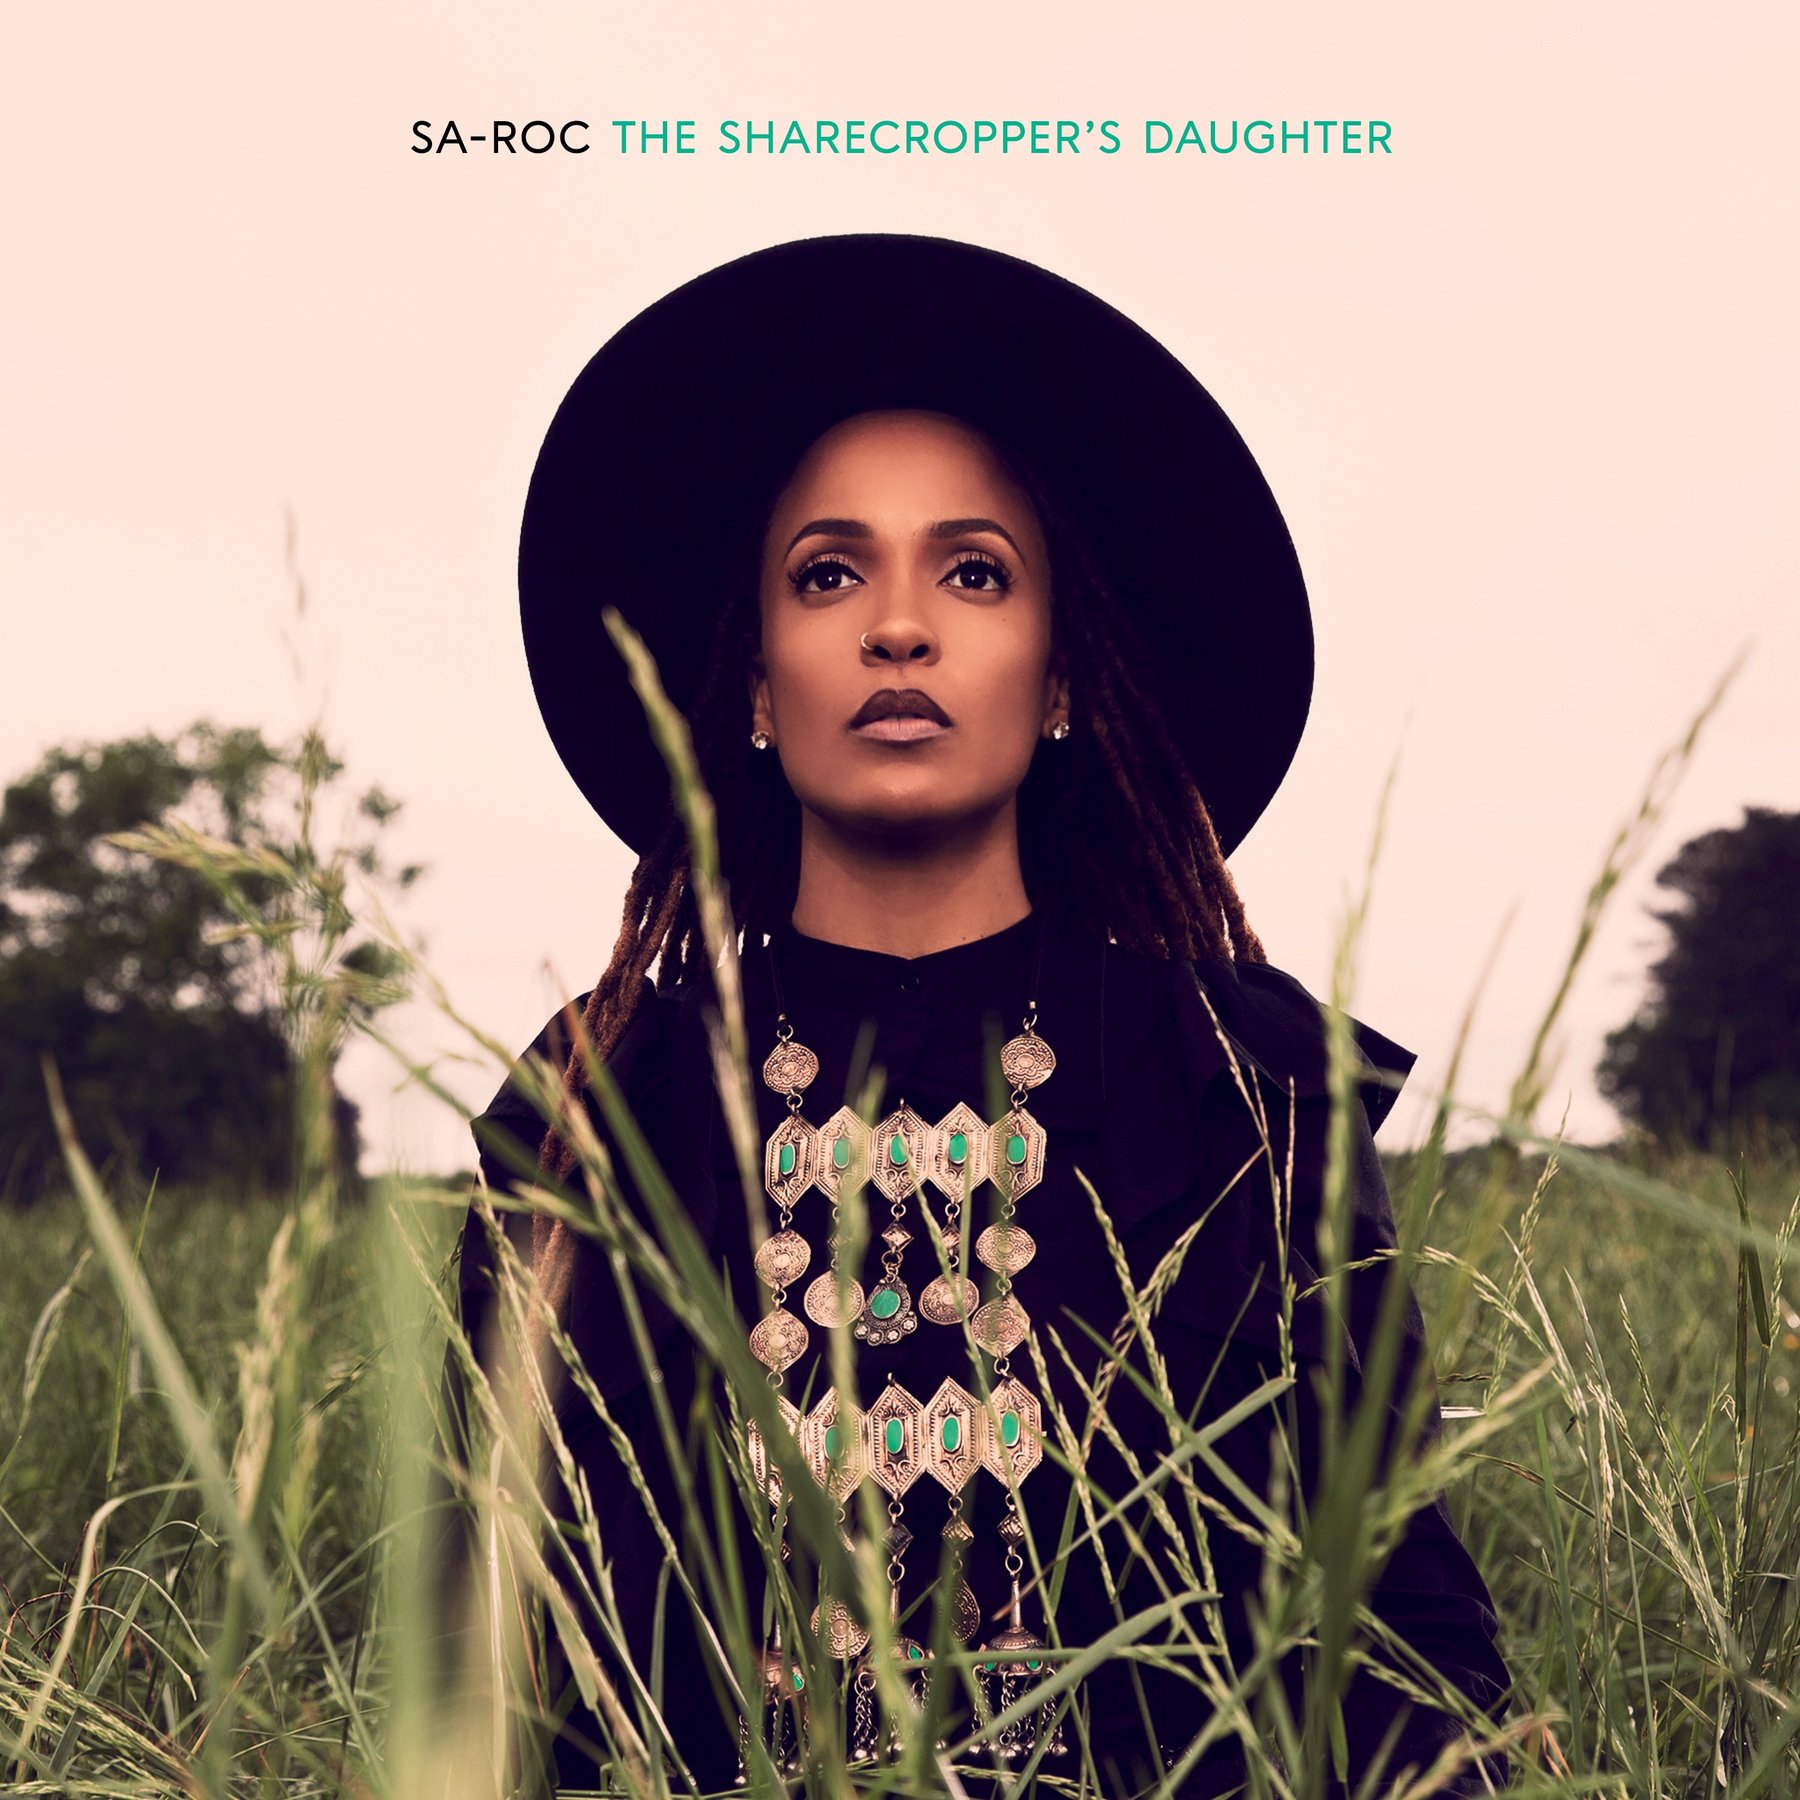 The_sharecropper_s_daughter_sa-roc